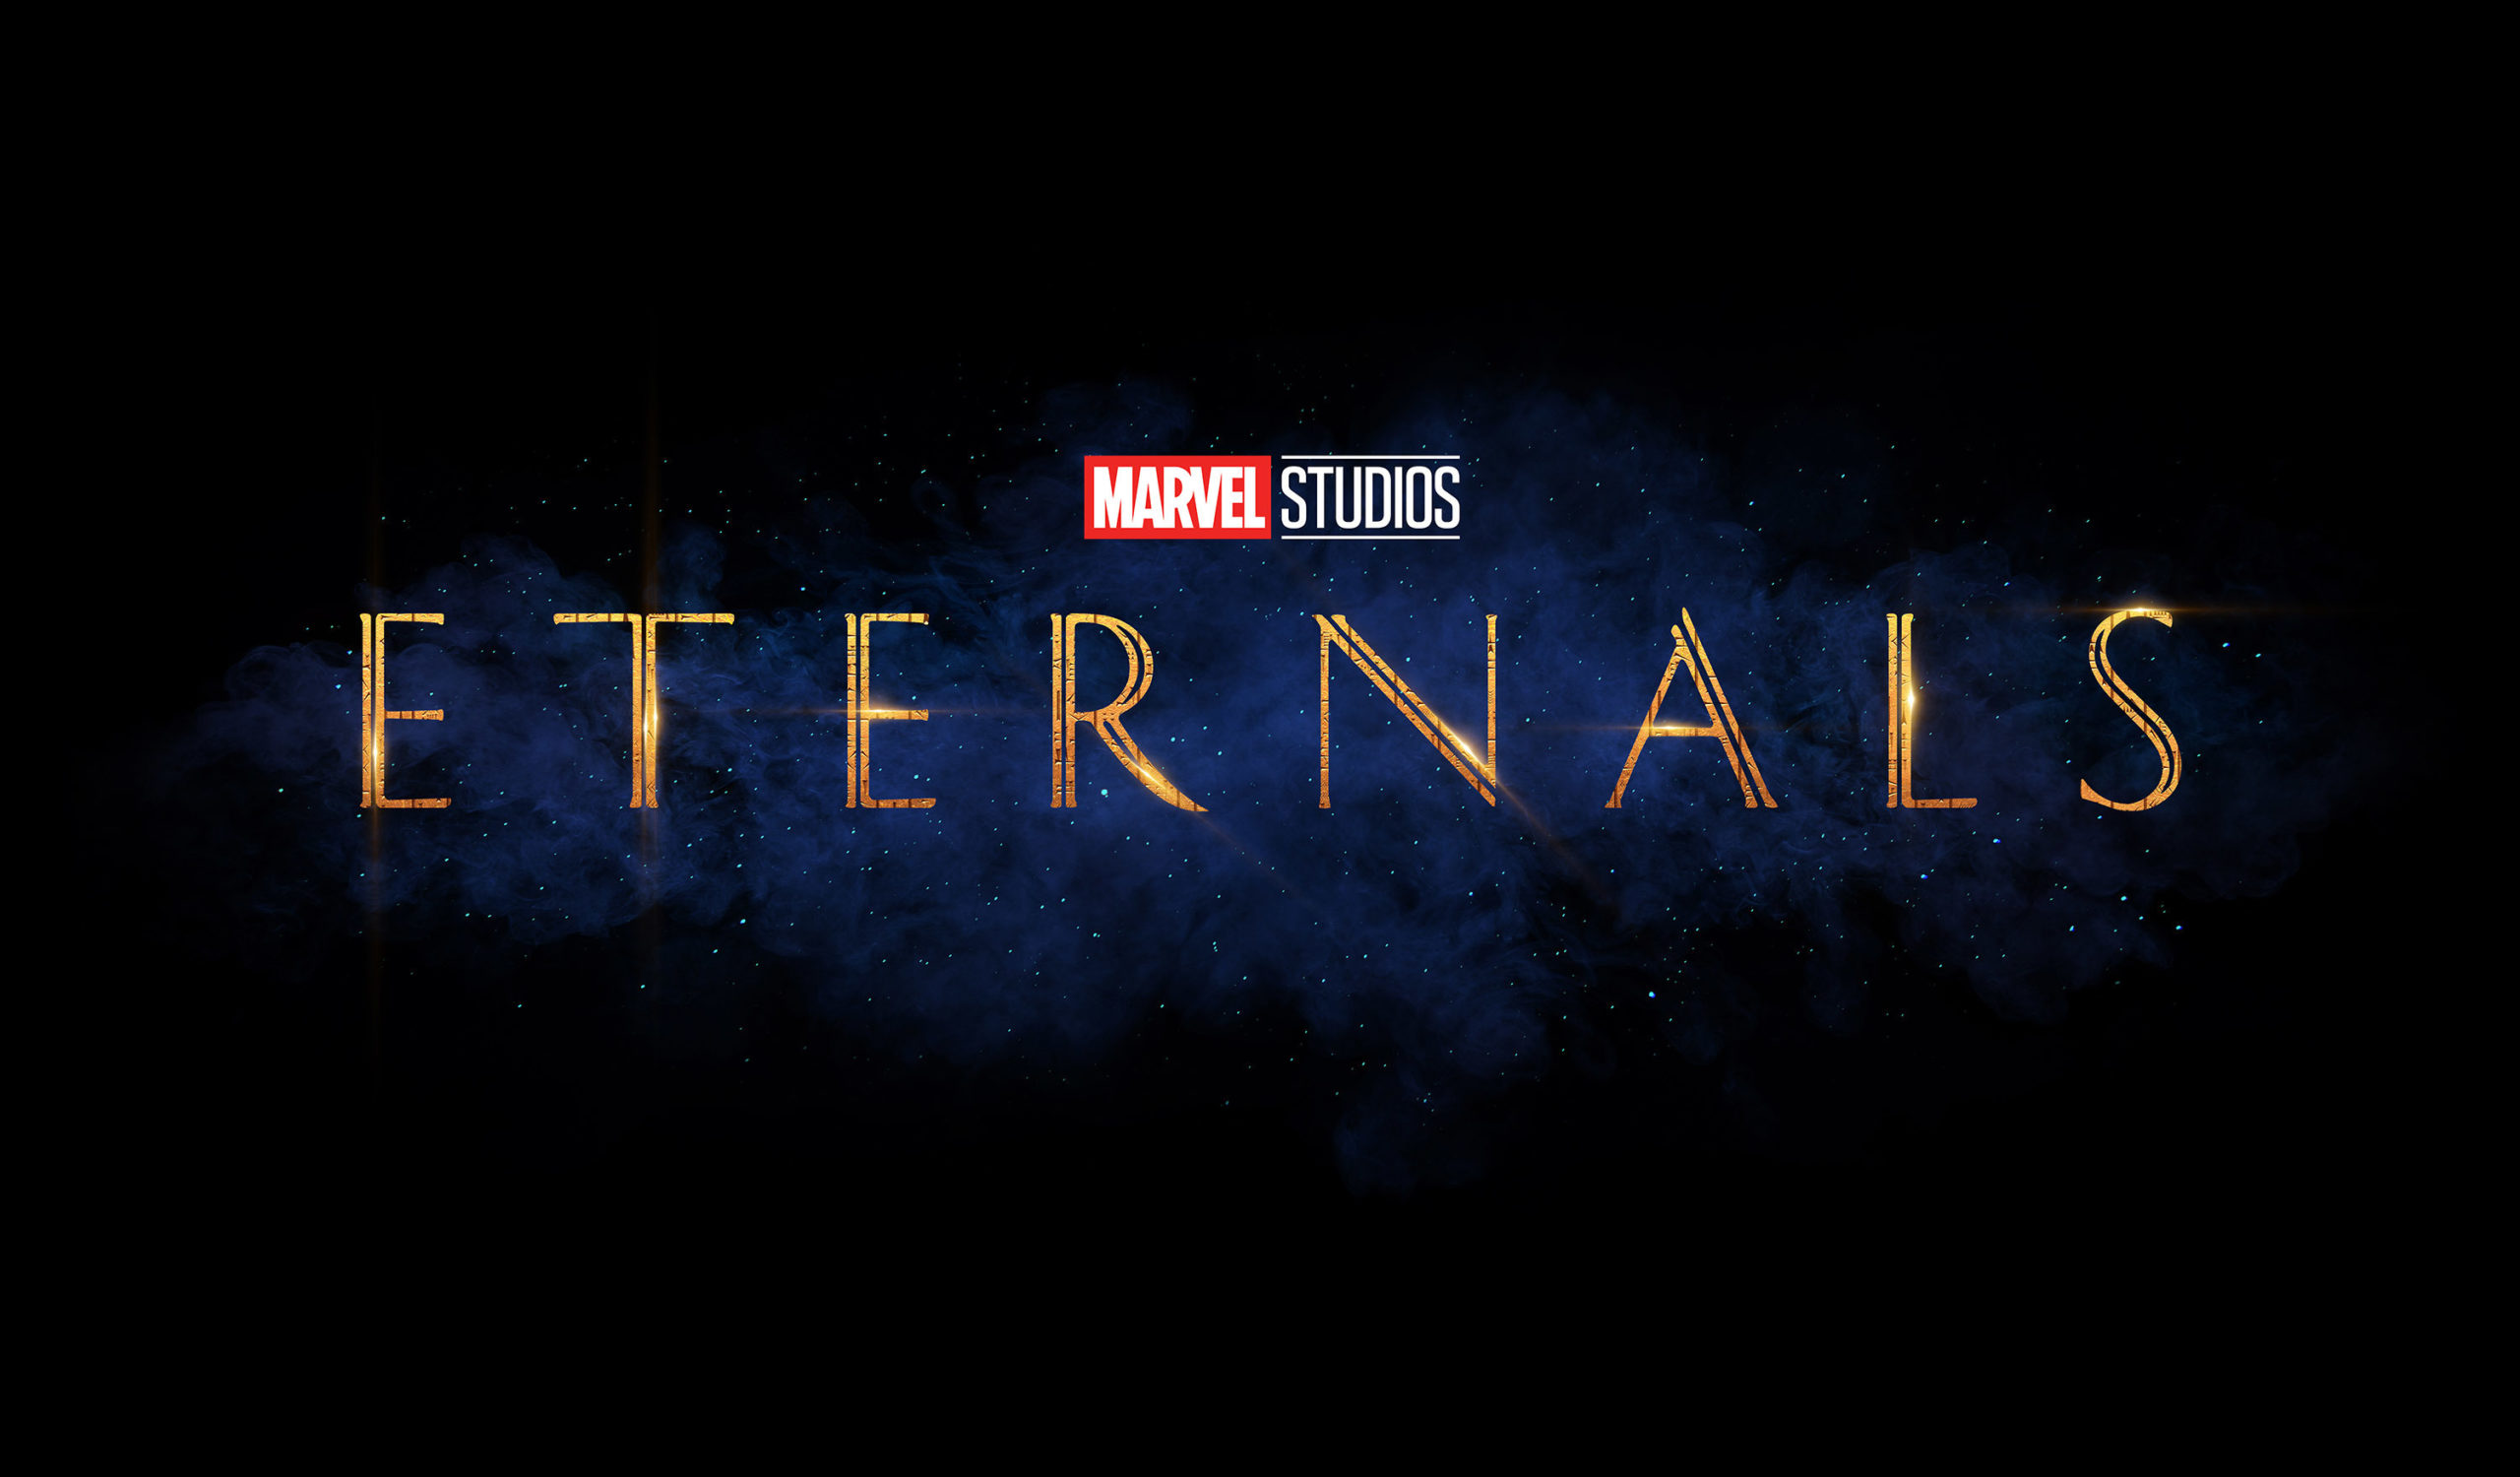 Logo of the Eternals movie by Disney